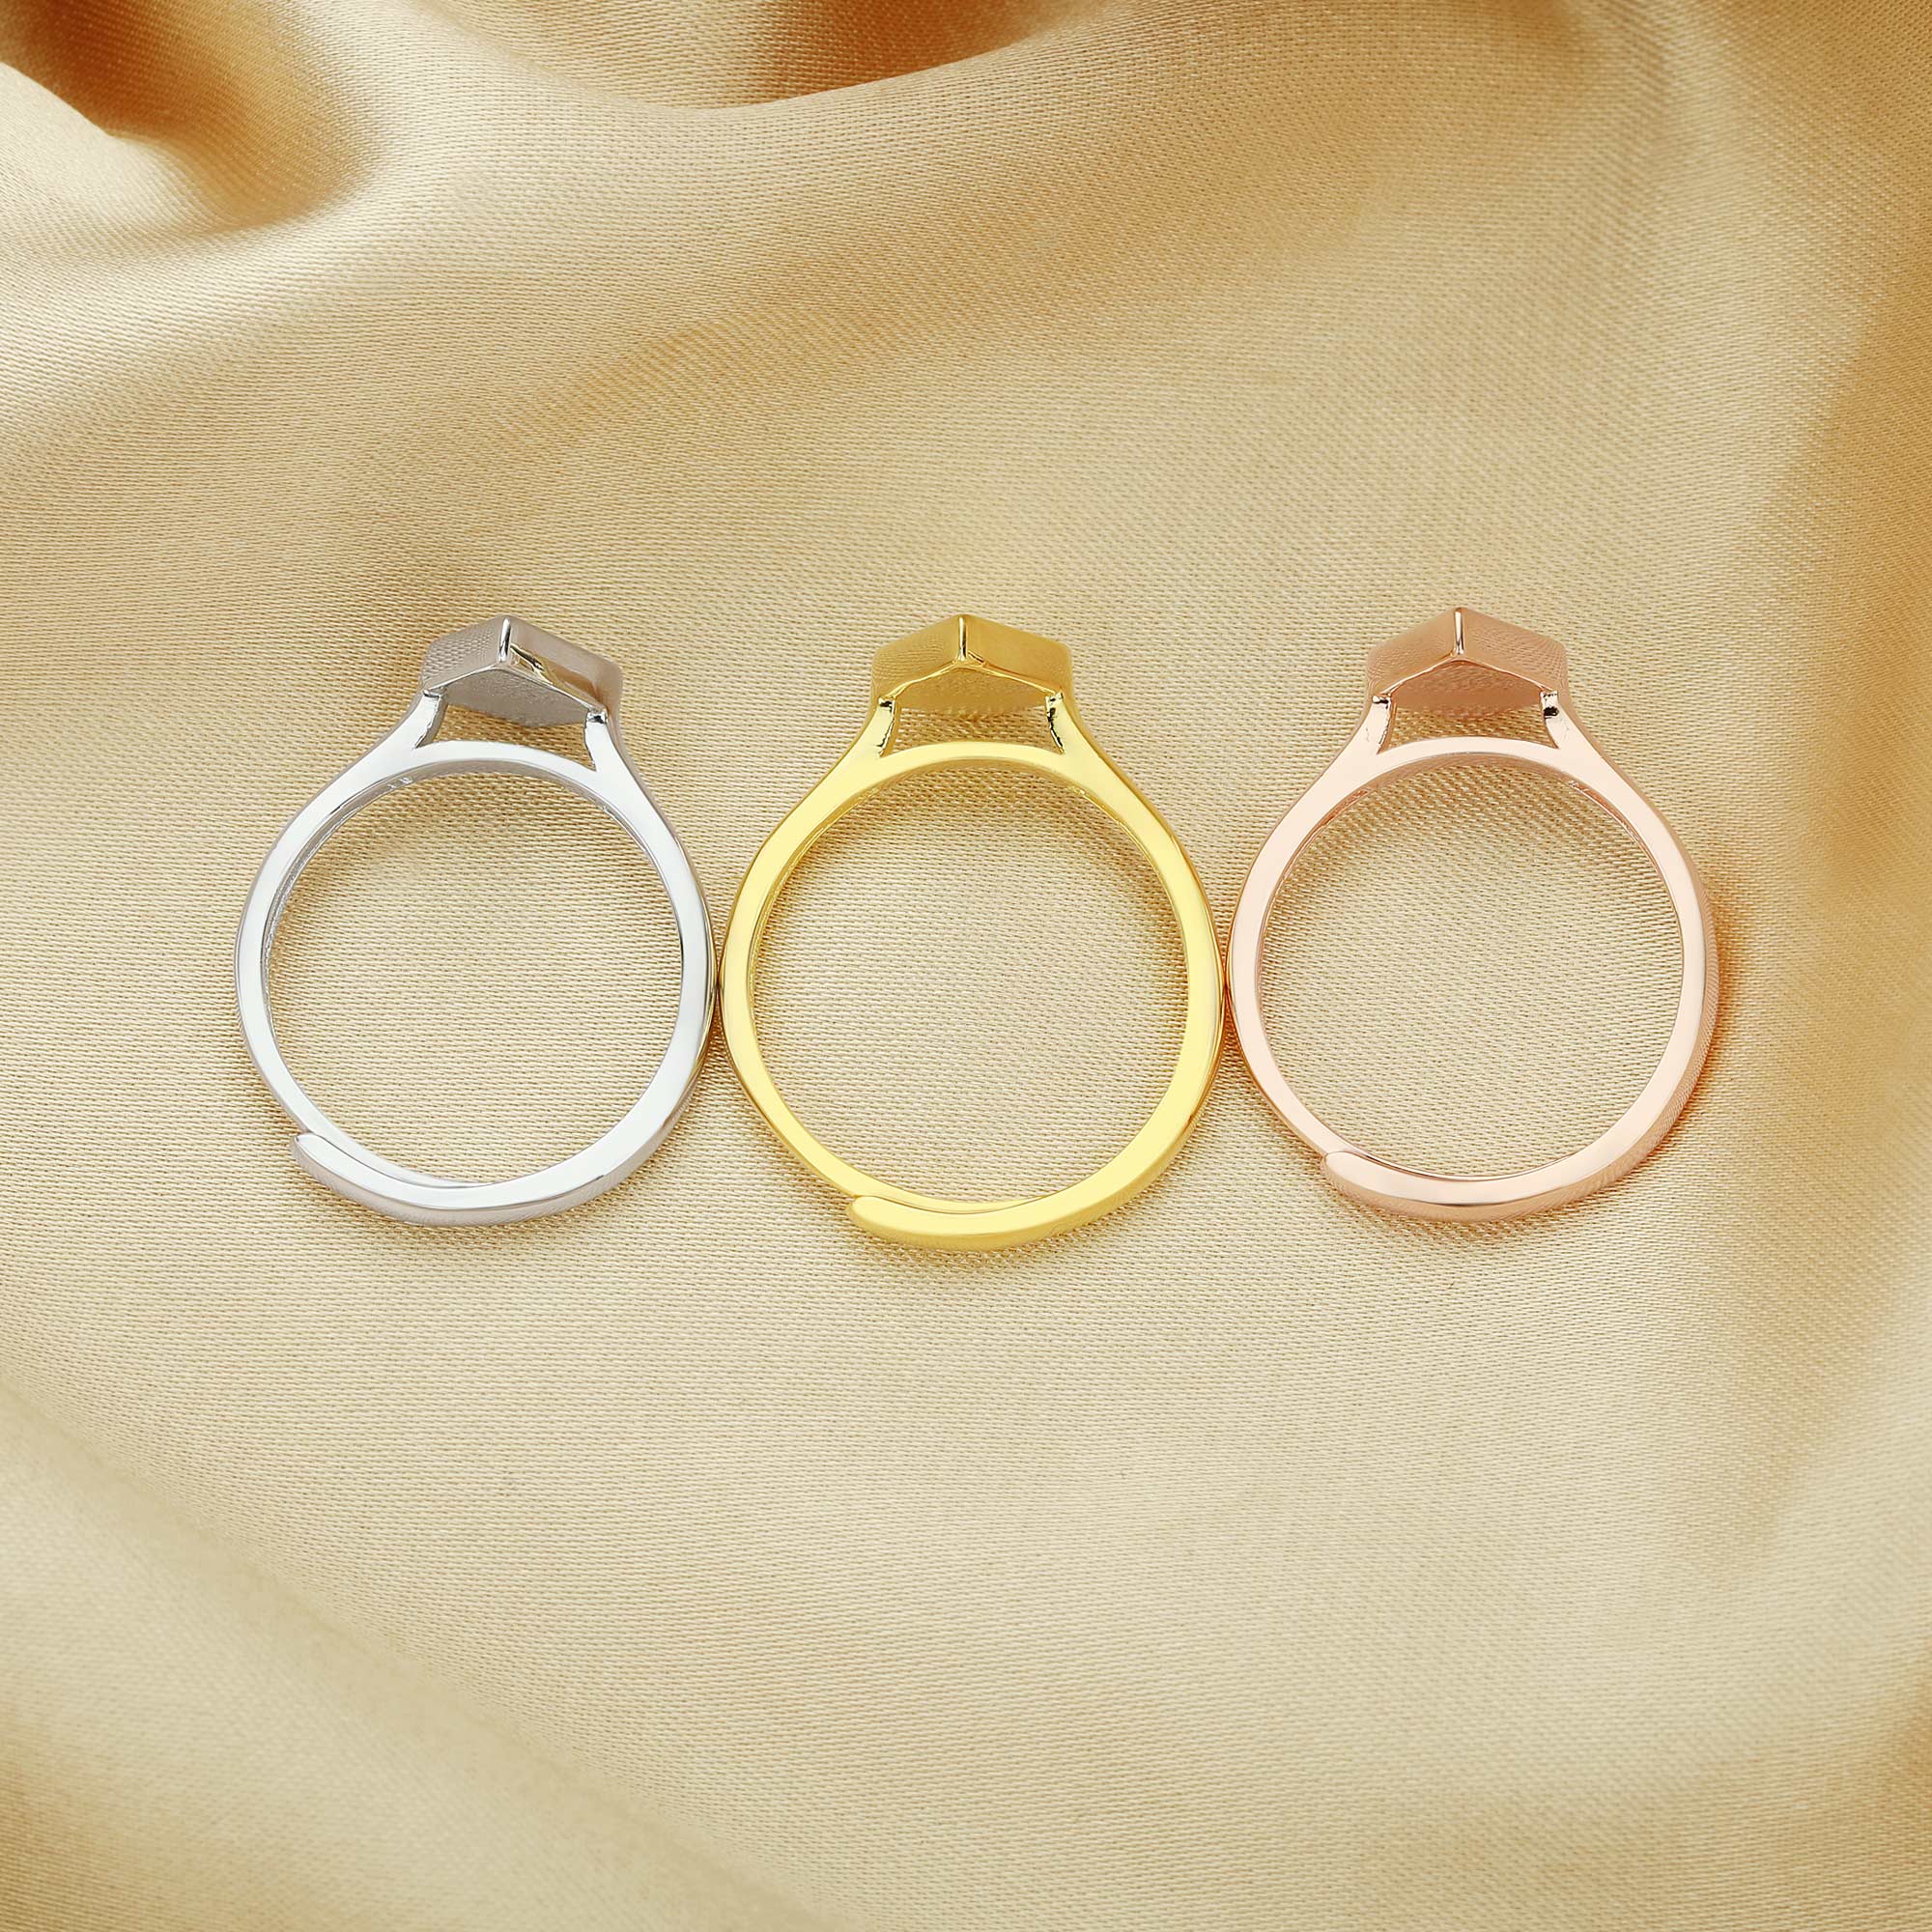 7x10MM Keepsake Breast Milk Resin Kite Shape Ring Settings,Solid Back Kite Bezel Ring For Resin,Solid 925 Sterling Silver Rose Gold Plated Ring,DIY Ring Supplies 1294604 - Click Image to Close